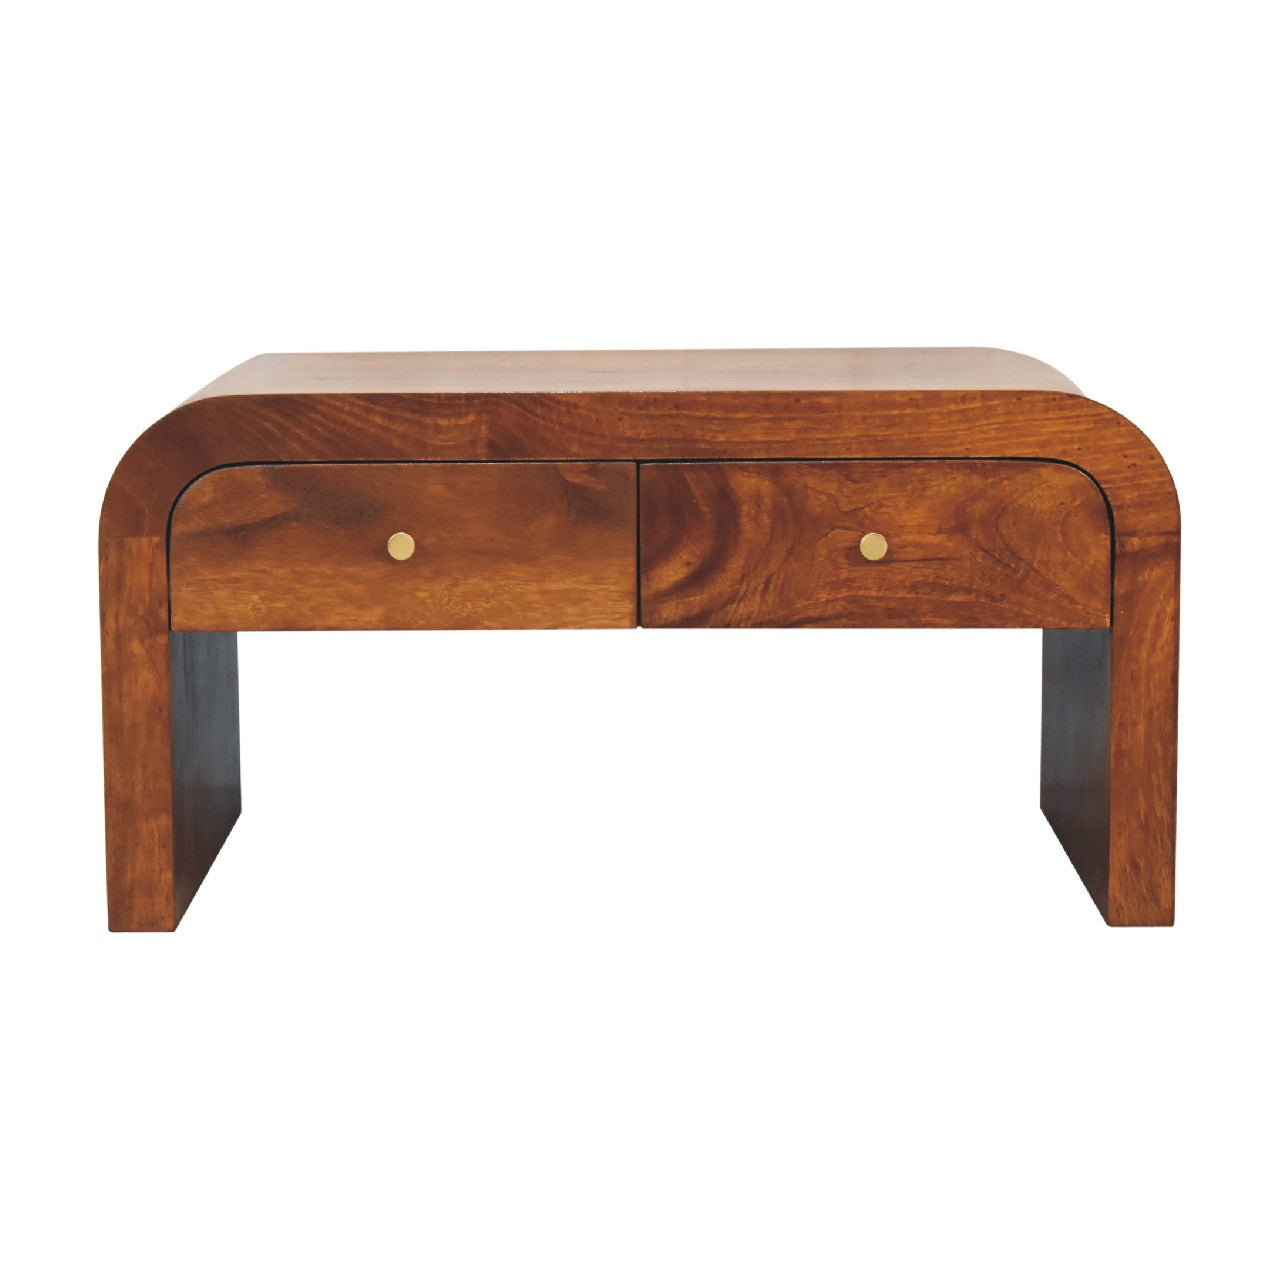 View Darcy Chestnut Coffee Table information